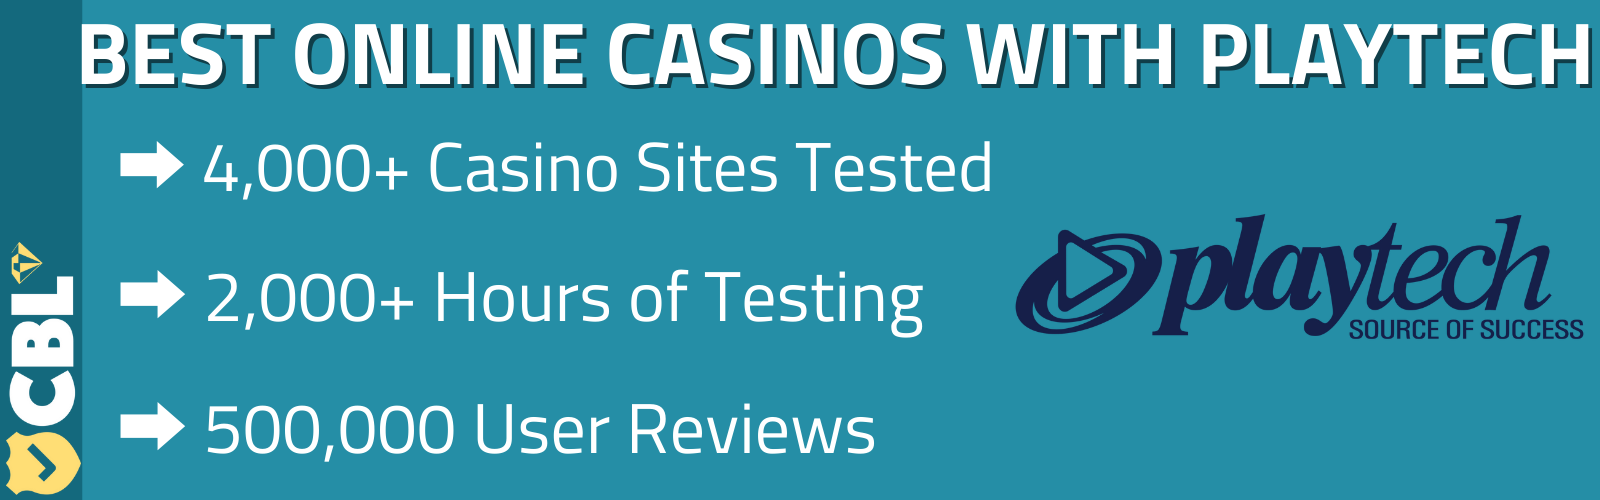 BEST ONLINE CASINOS WITH PLAYTECH